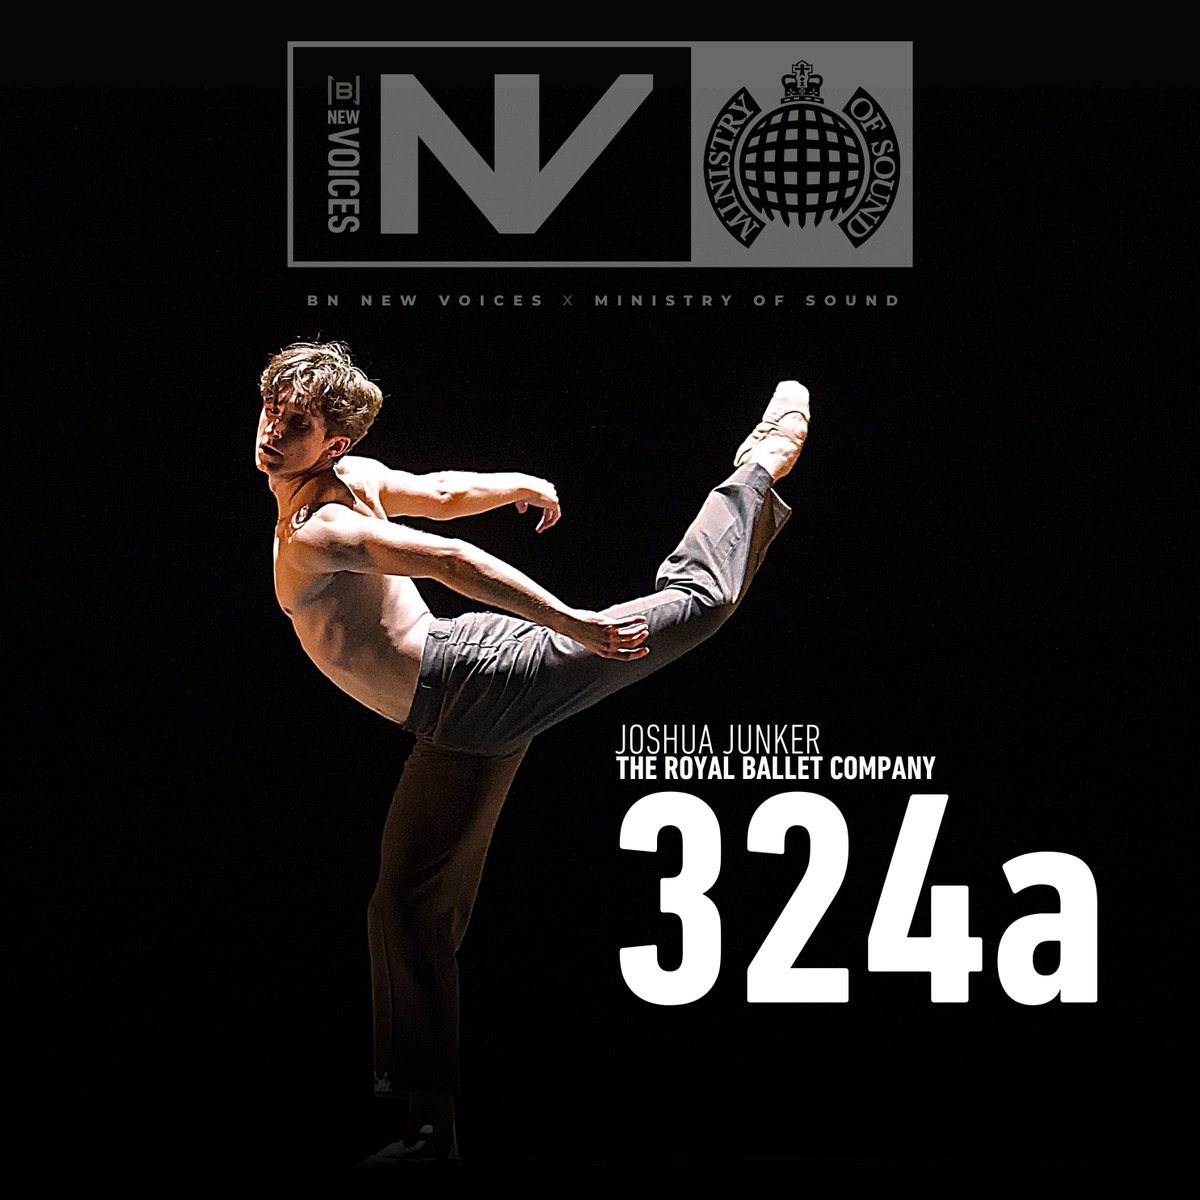 Introducing the Ballet Nights New Voices at Ministry of Sound... 324a, choreographed and performed by Joshua Junker, First Artist of The Royal Ballet. Secure your tickets today and witness the electrifying show at Ministry of Sound... Book Now at balletnights.com/newvoices